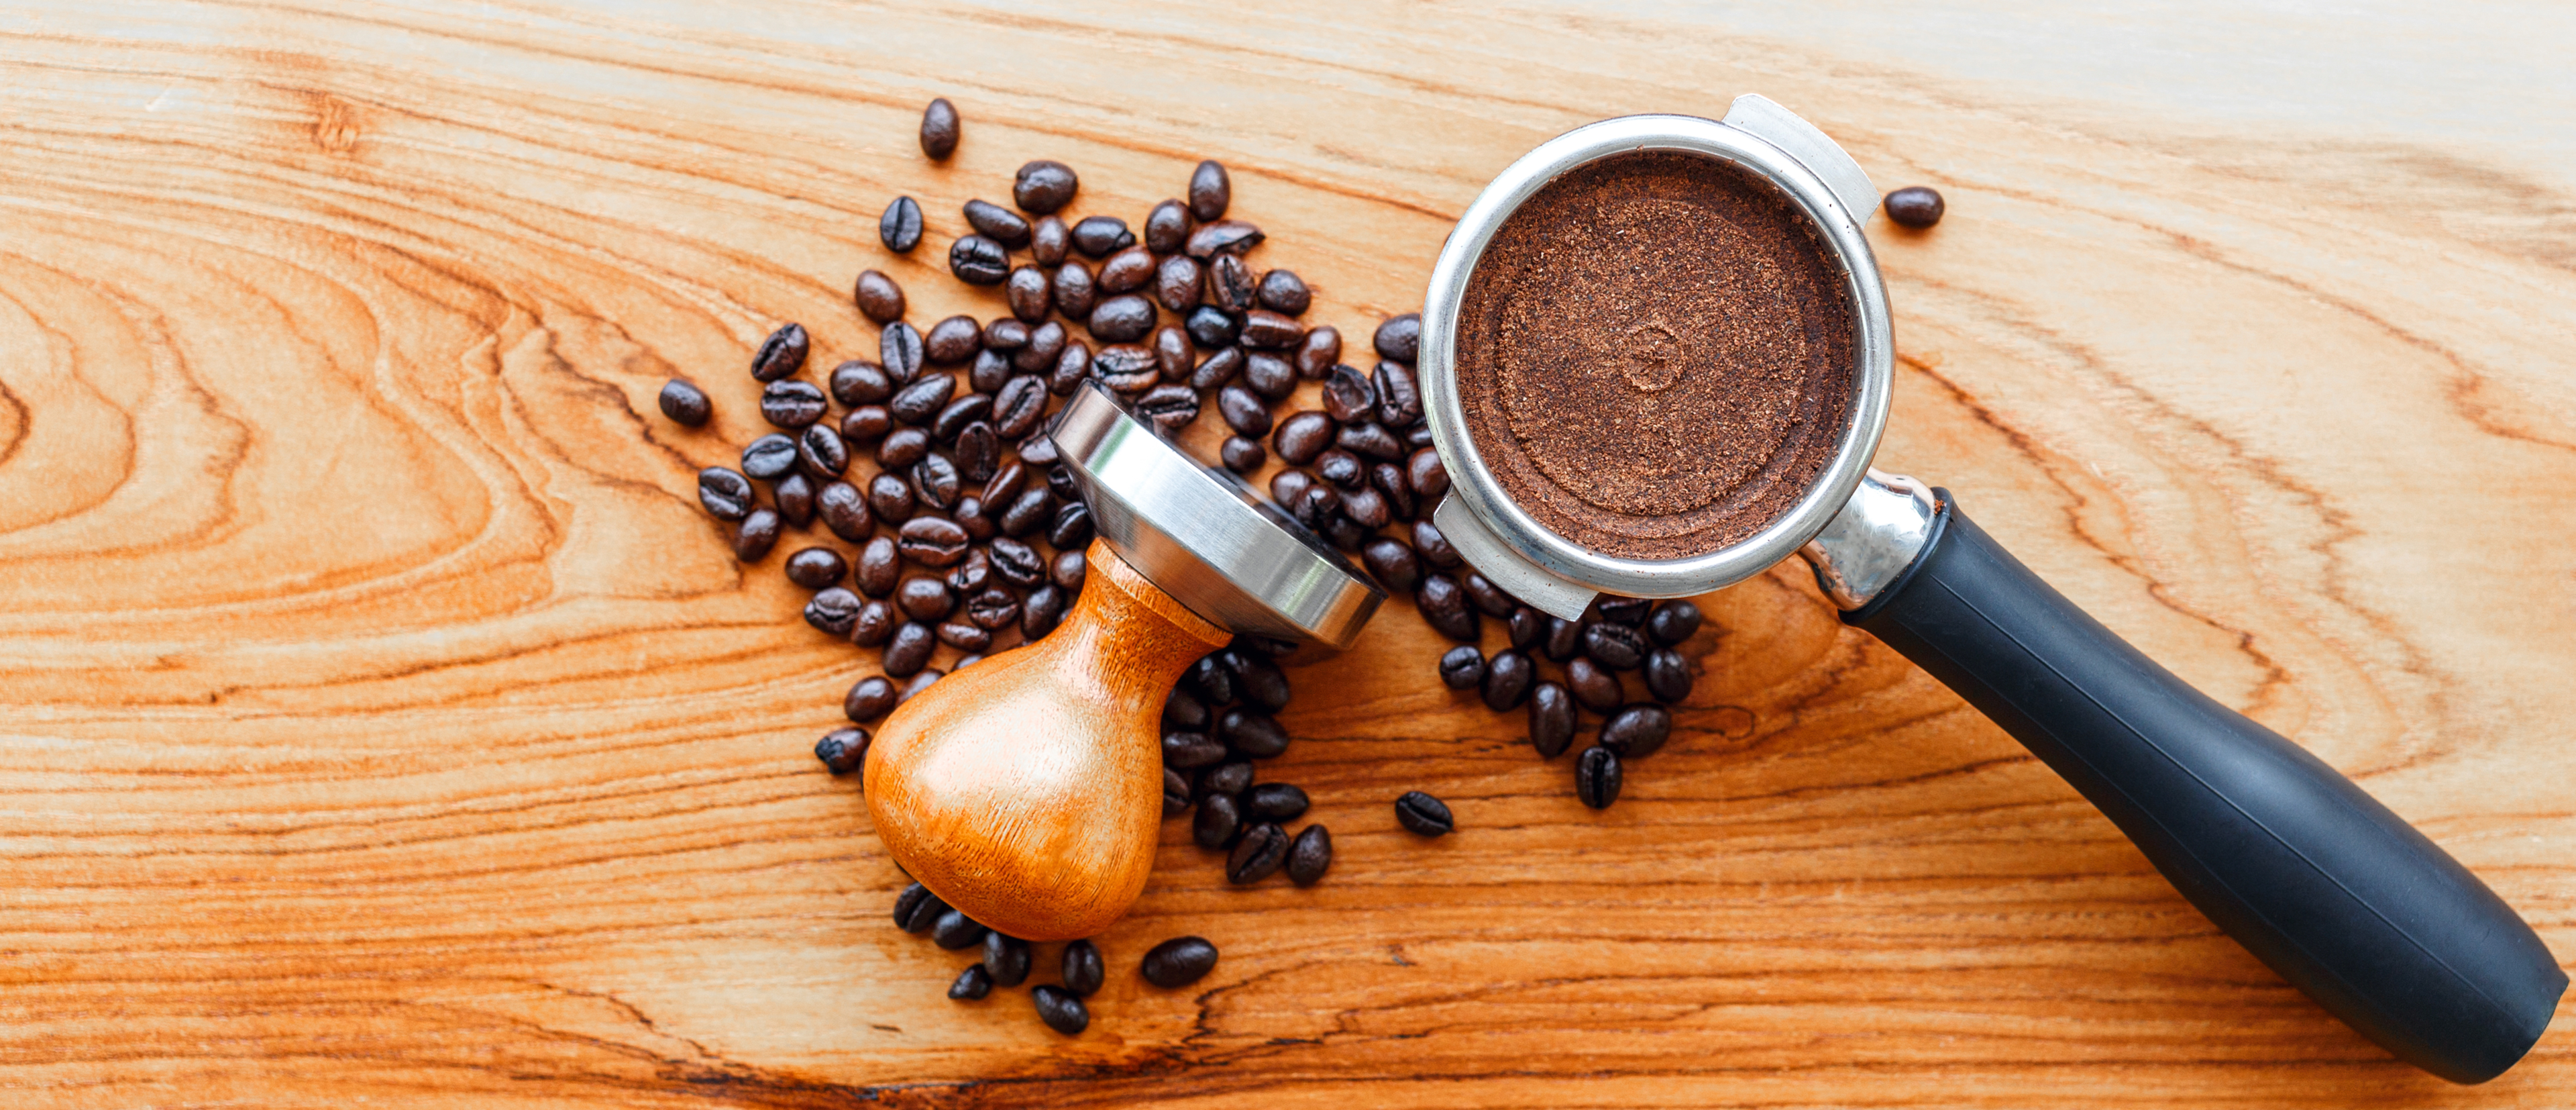 coffee portafilter tool, tamper, and roasted coffee beans on wooden background